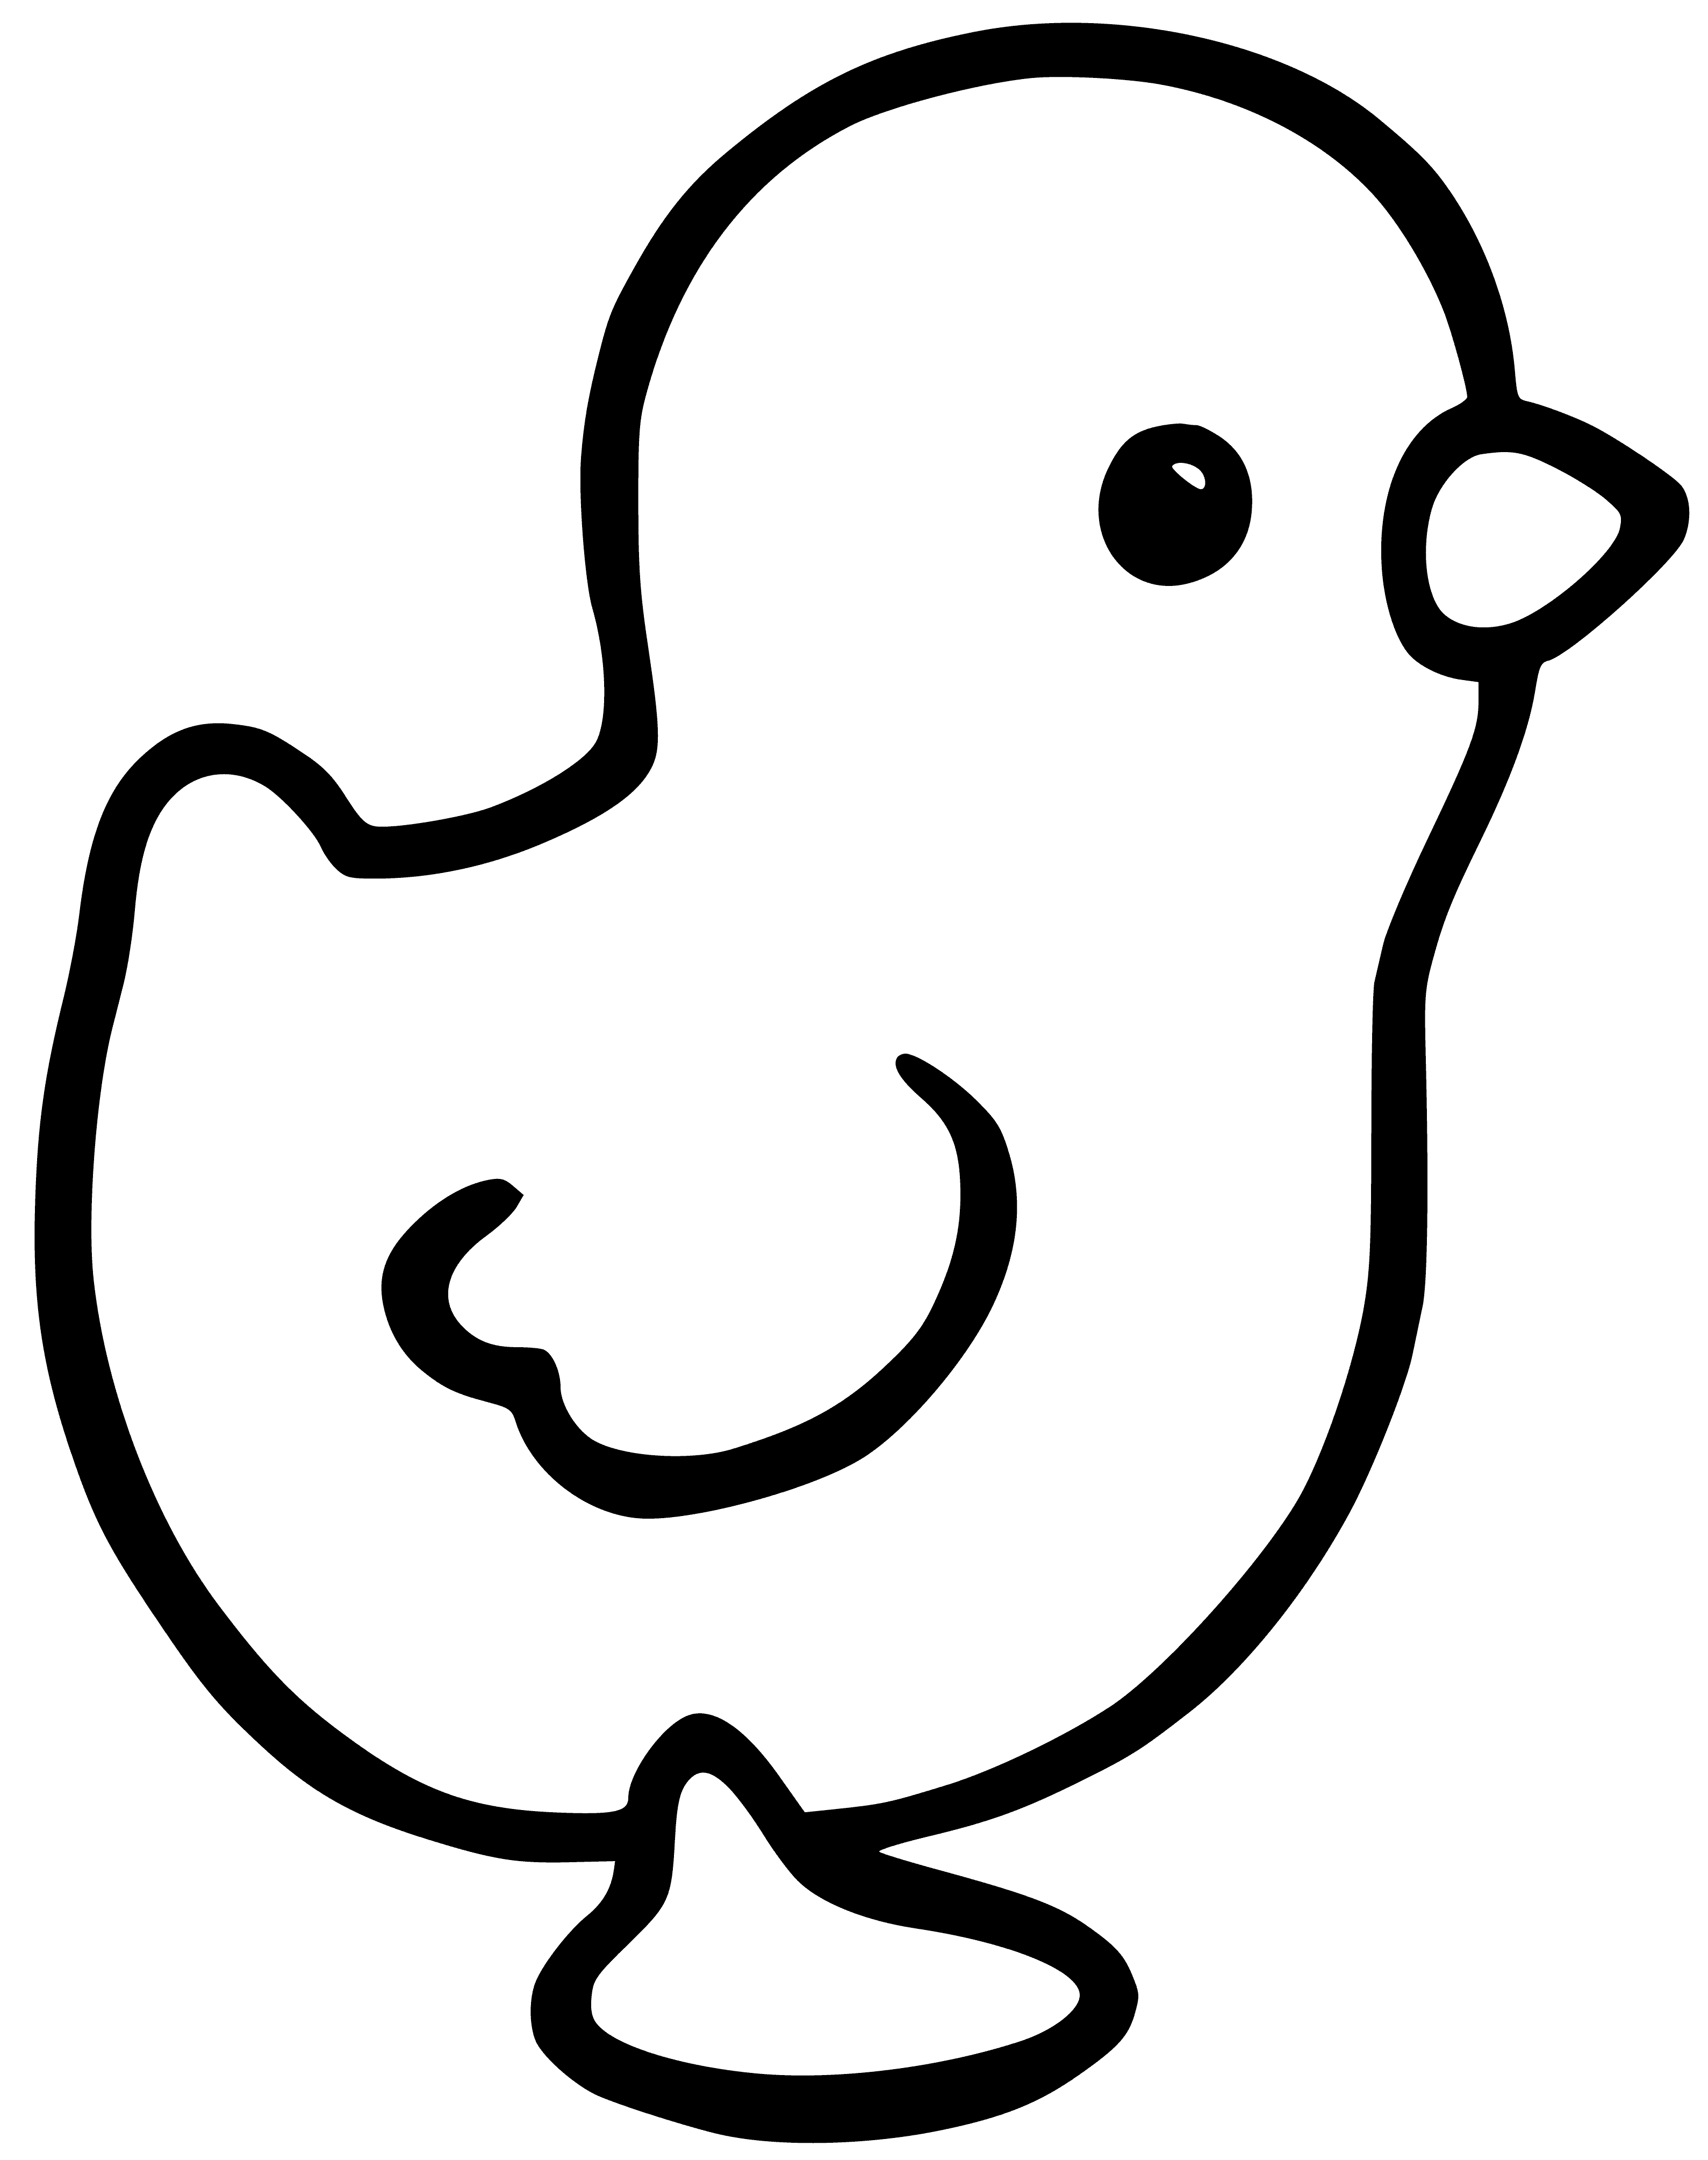 coloring page: A bright yellow chick with small orange beak & black eyes, feet & leaves around it. #chick #yellow #black #green